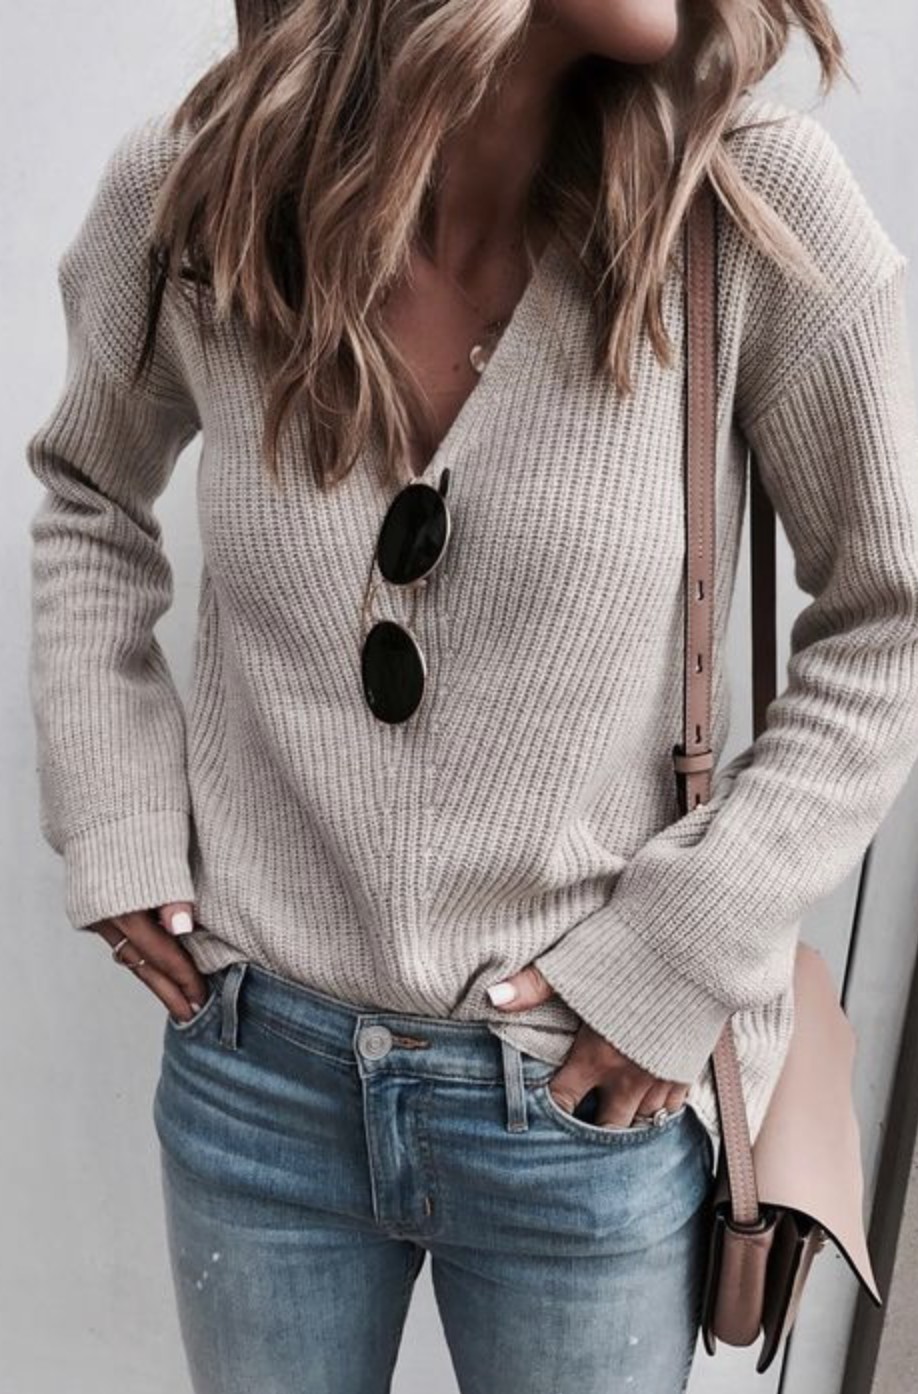 White style outfit with sweater, hoodie, jeans: Polo neck,  Jeans Outfit,  White Outfit  